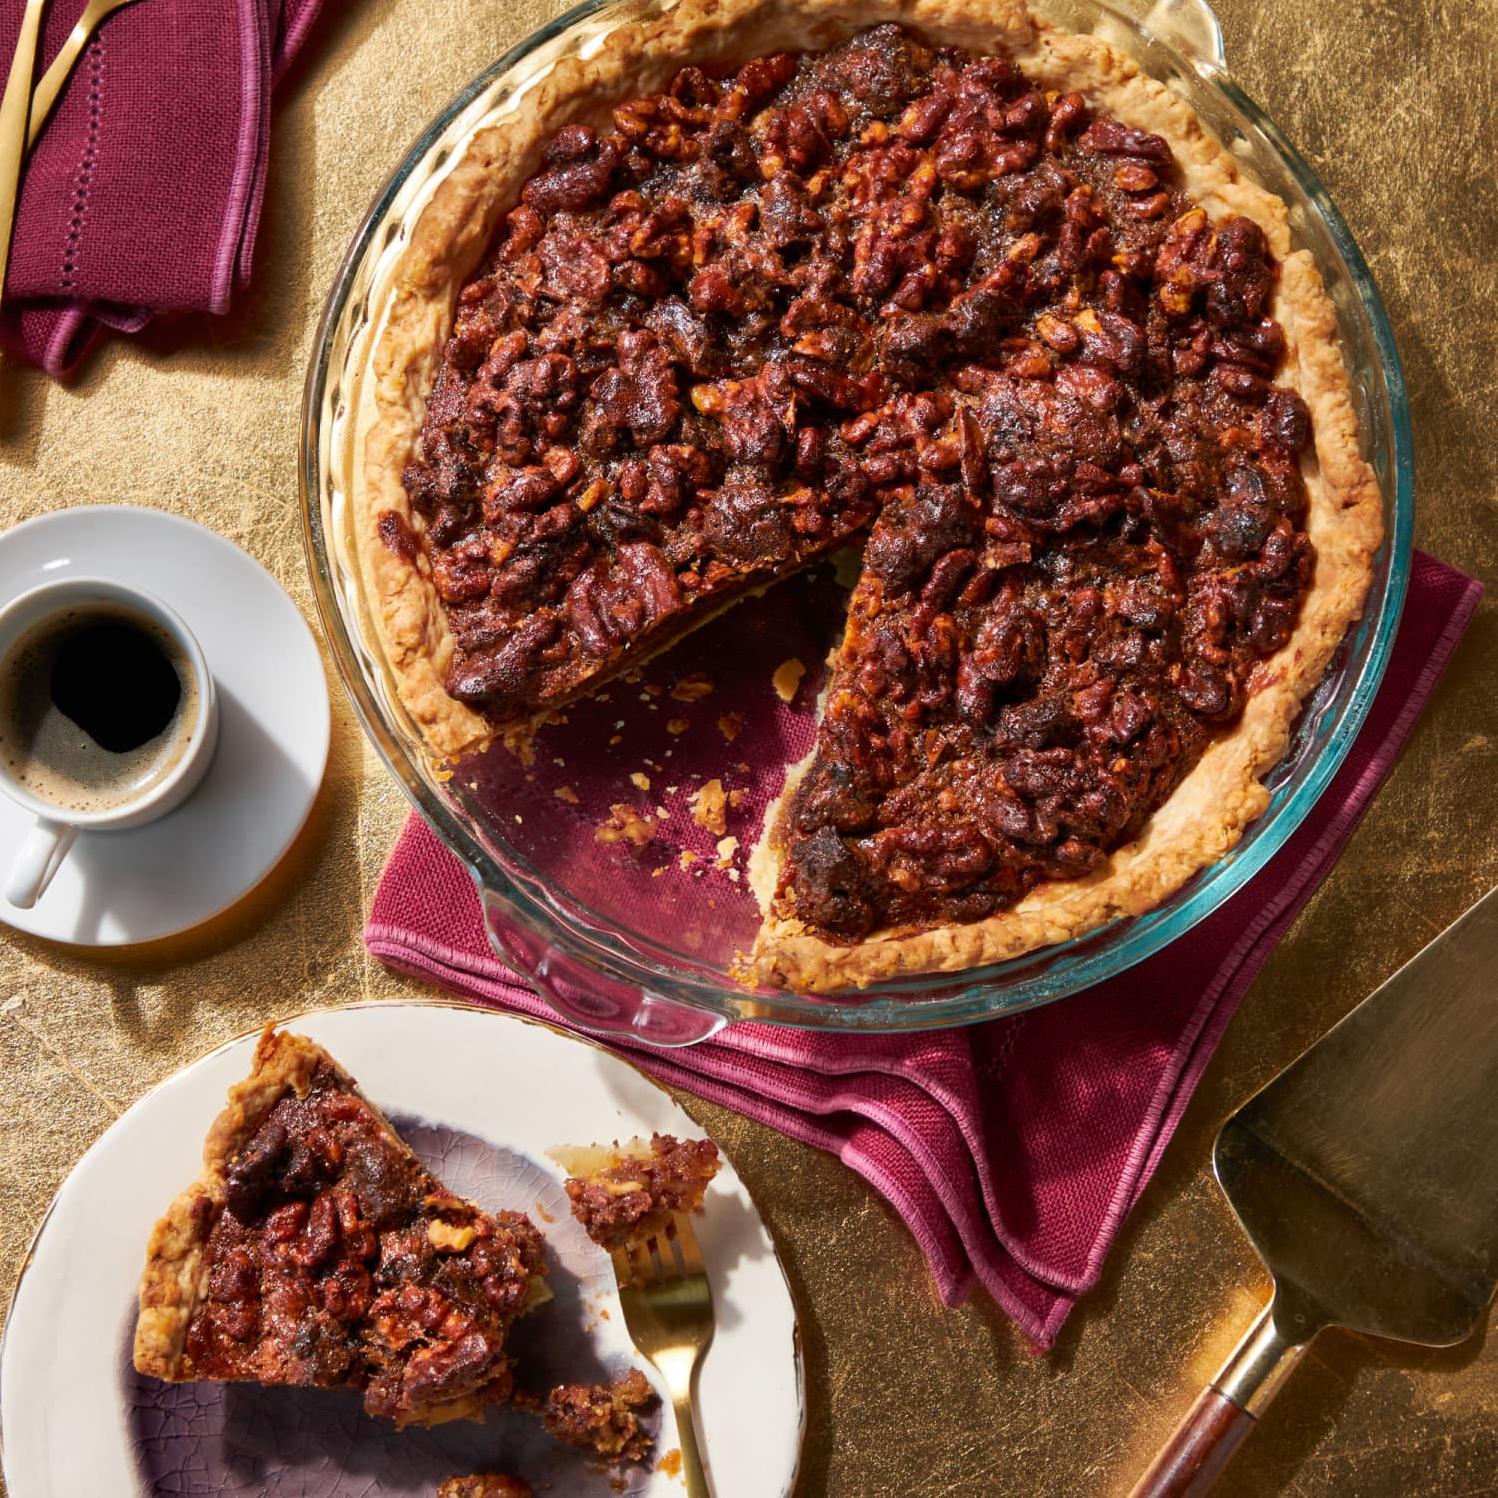  This is not your ordinary pie - it's a coffee-infused masterpiece!